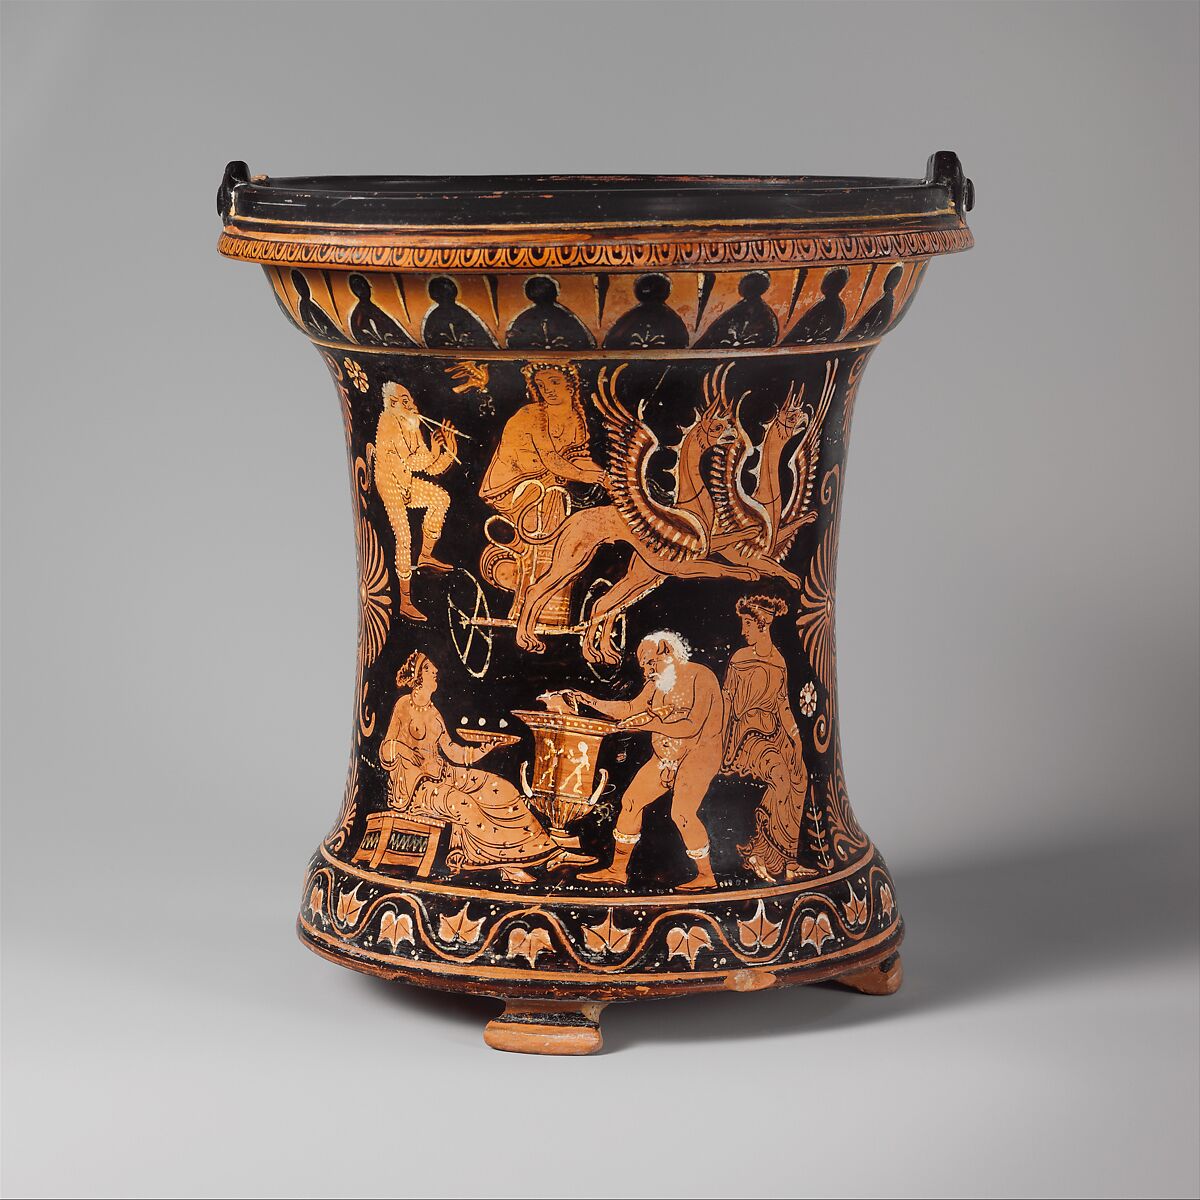 Terracotta situla (bucket), Attributed to the Lycurgus Painter, Terracotta, Greek, South Italian, Apulian 